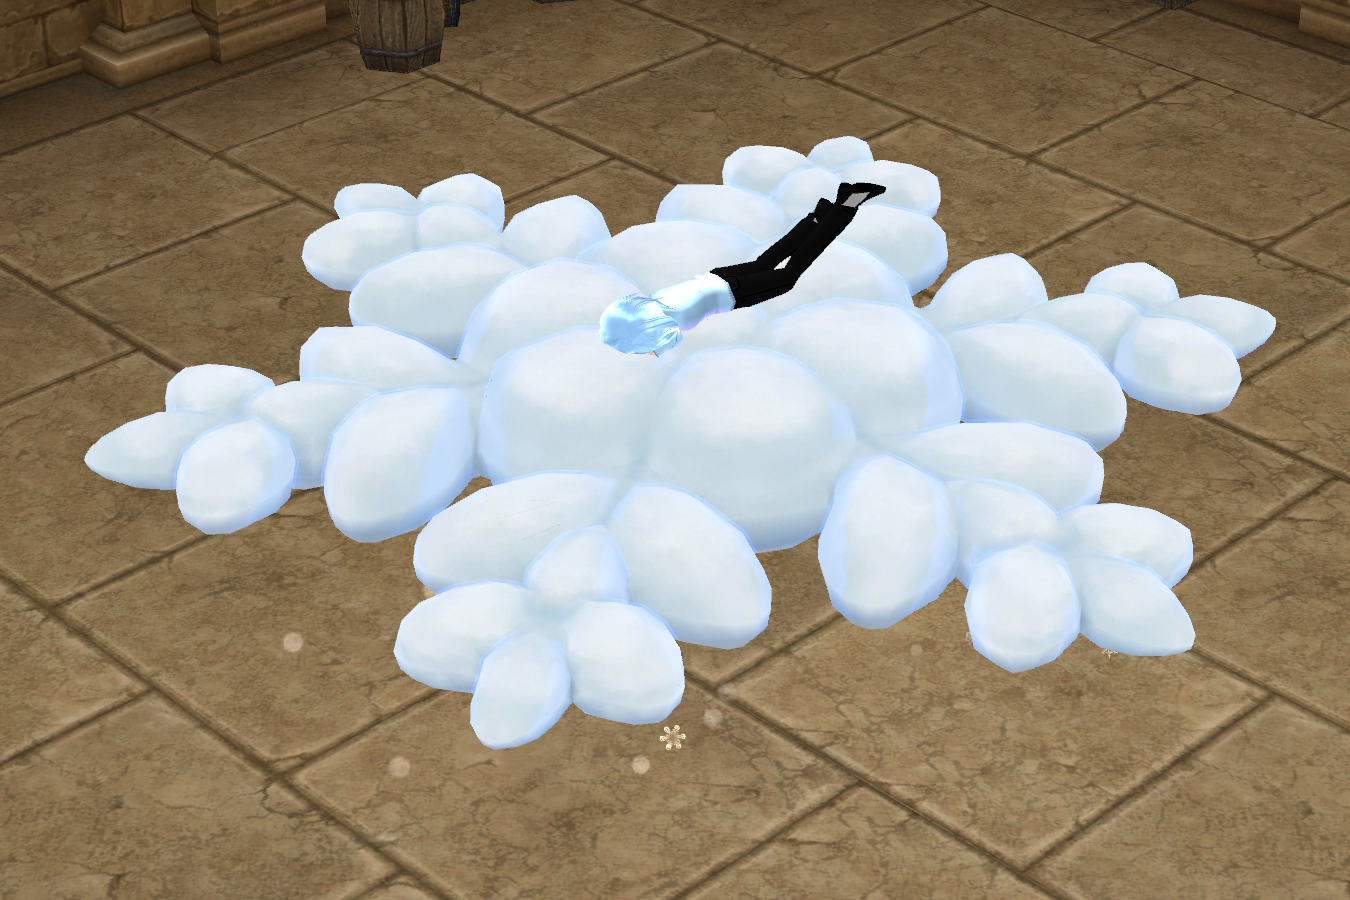 Seated preview of Snow Cloud Bed